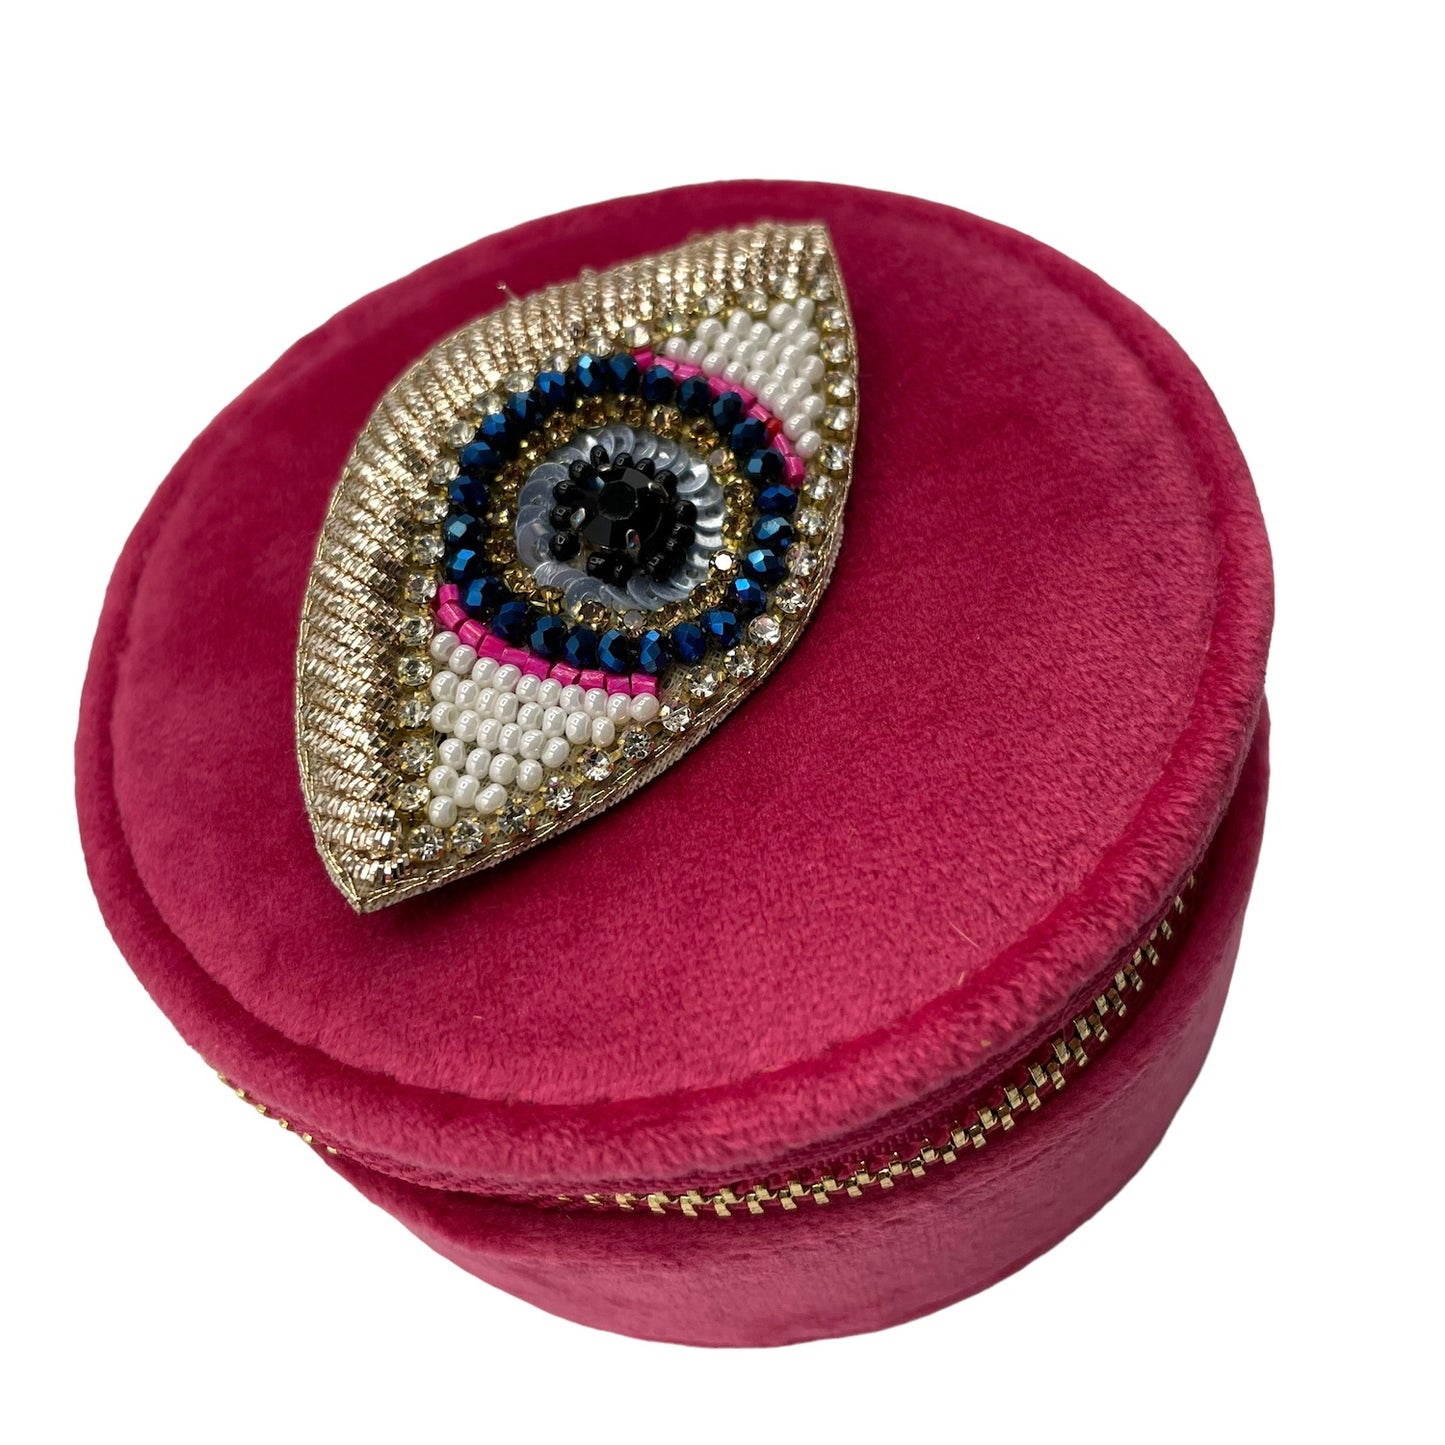 Jewellery travel pot in recycled velvet, bright pink with a golden eye pin